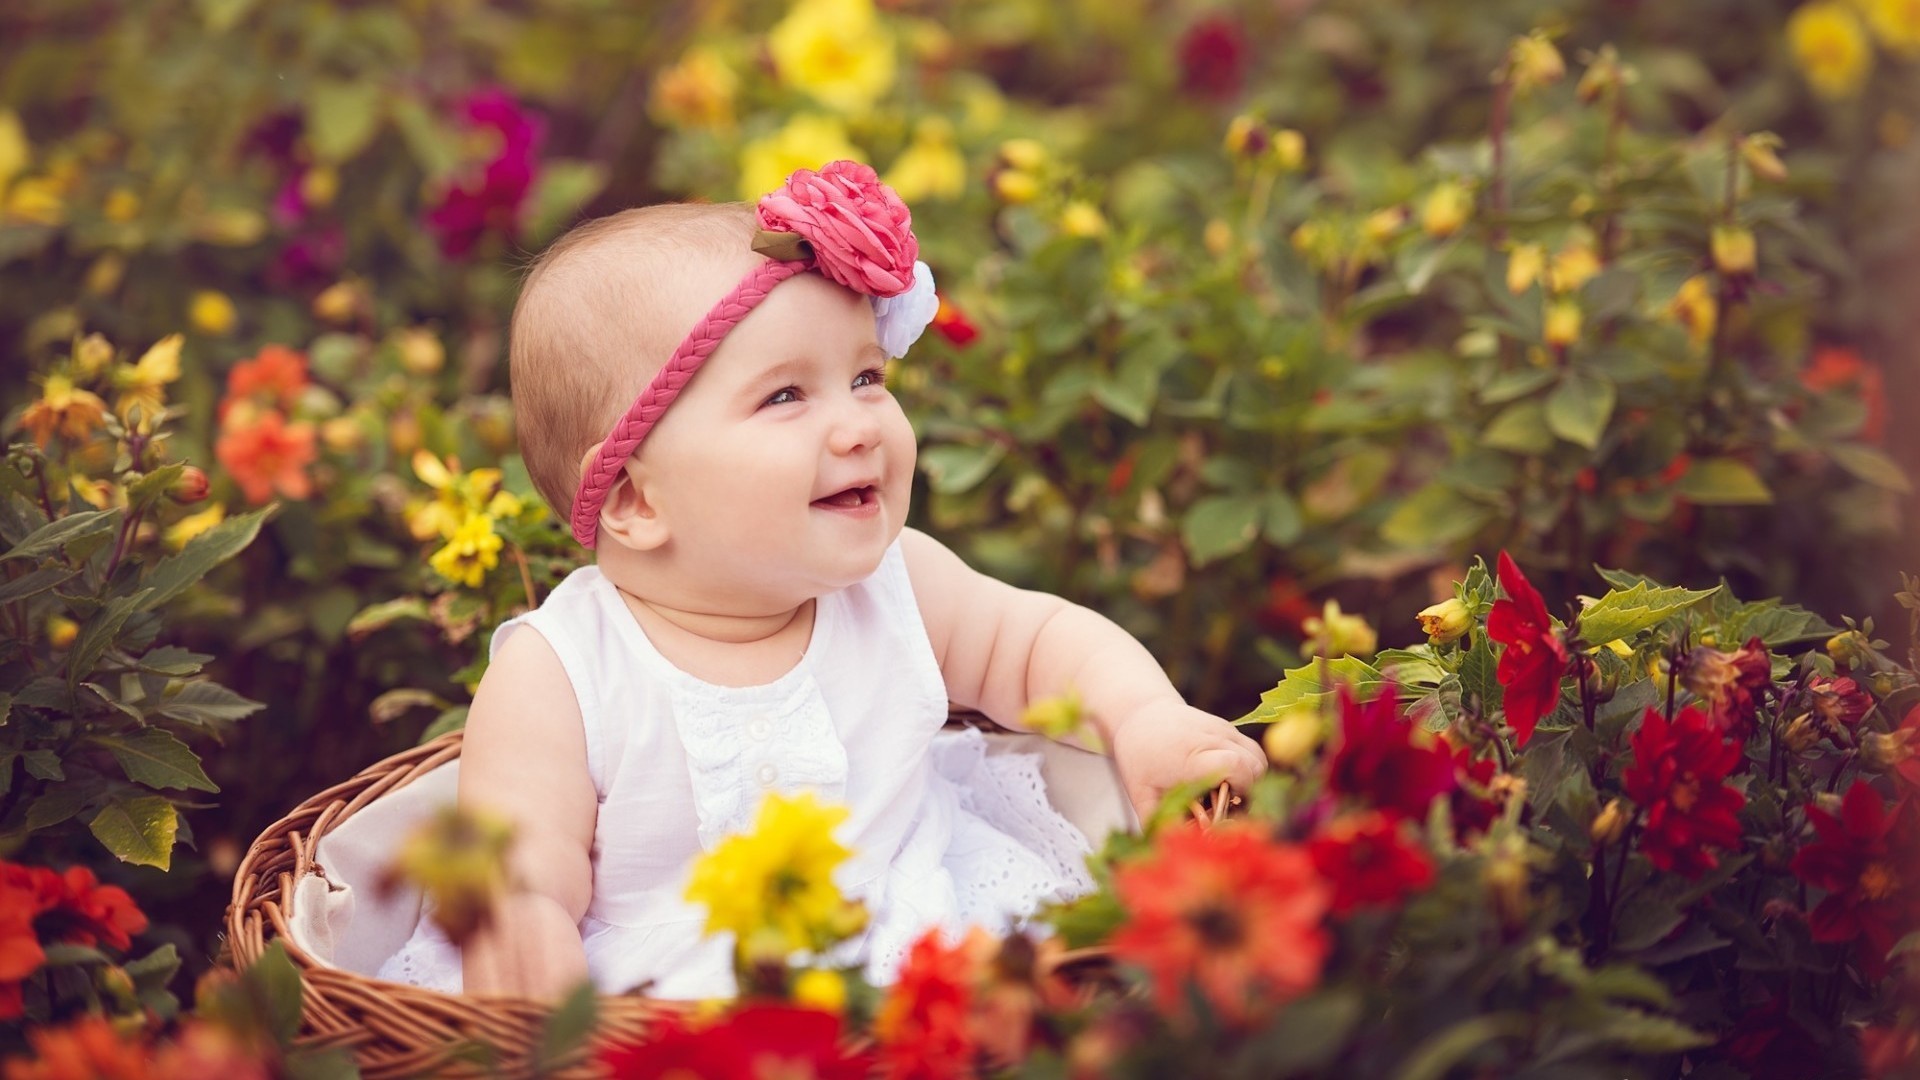 1920x1080 cute baby wallpapers android